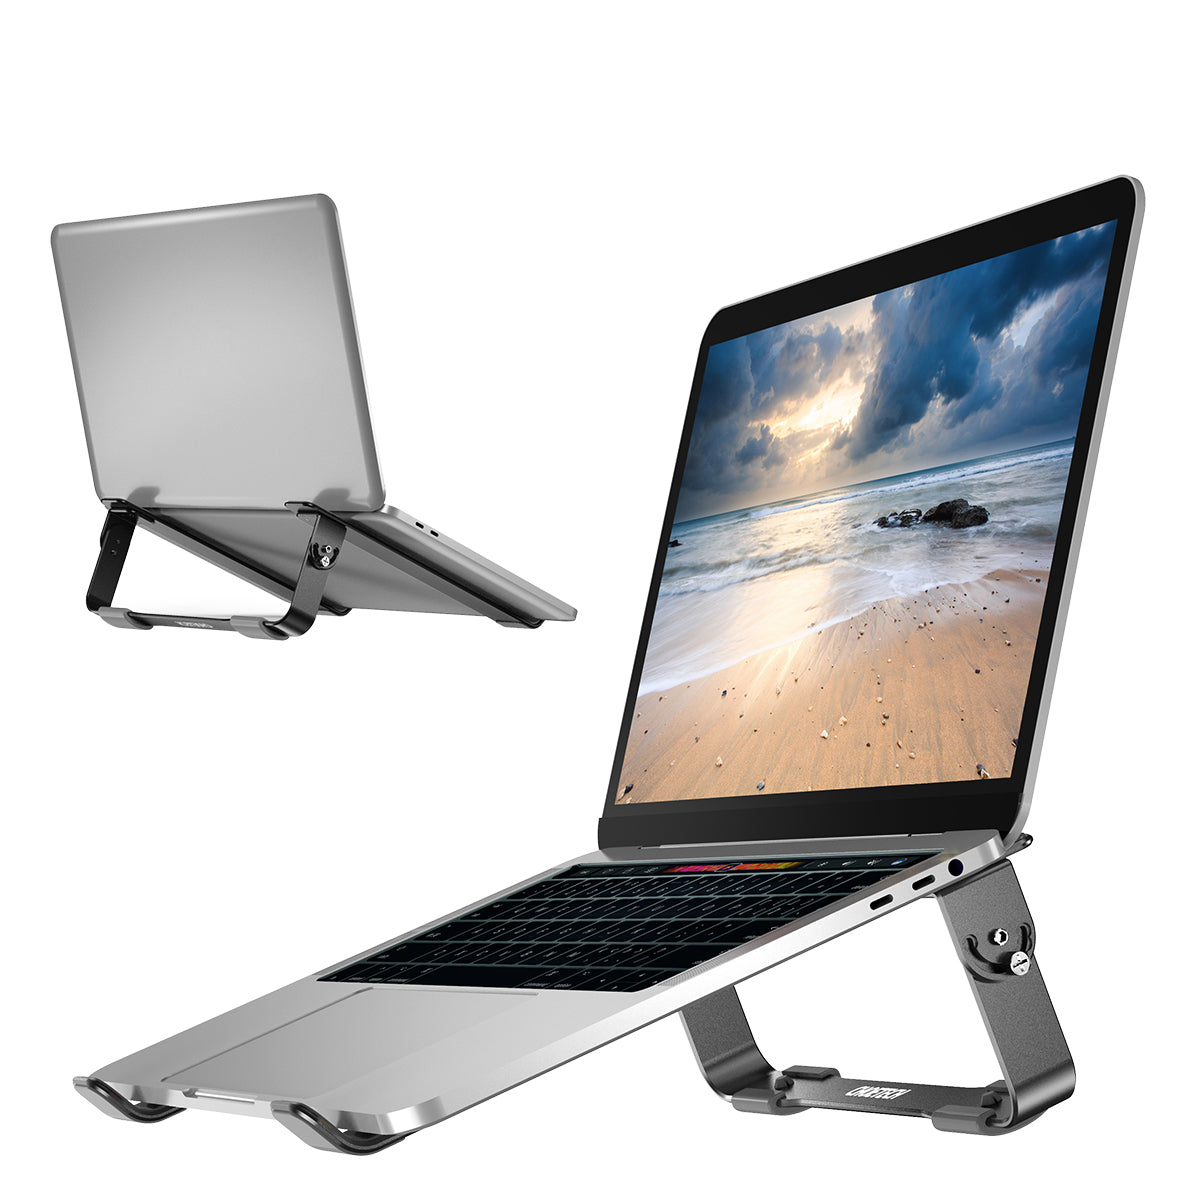 H033 Choetech Cooling Aluminum Laptop Stand